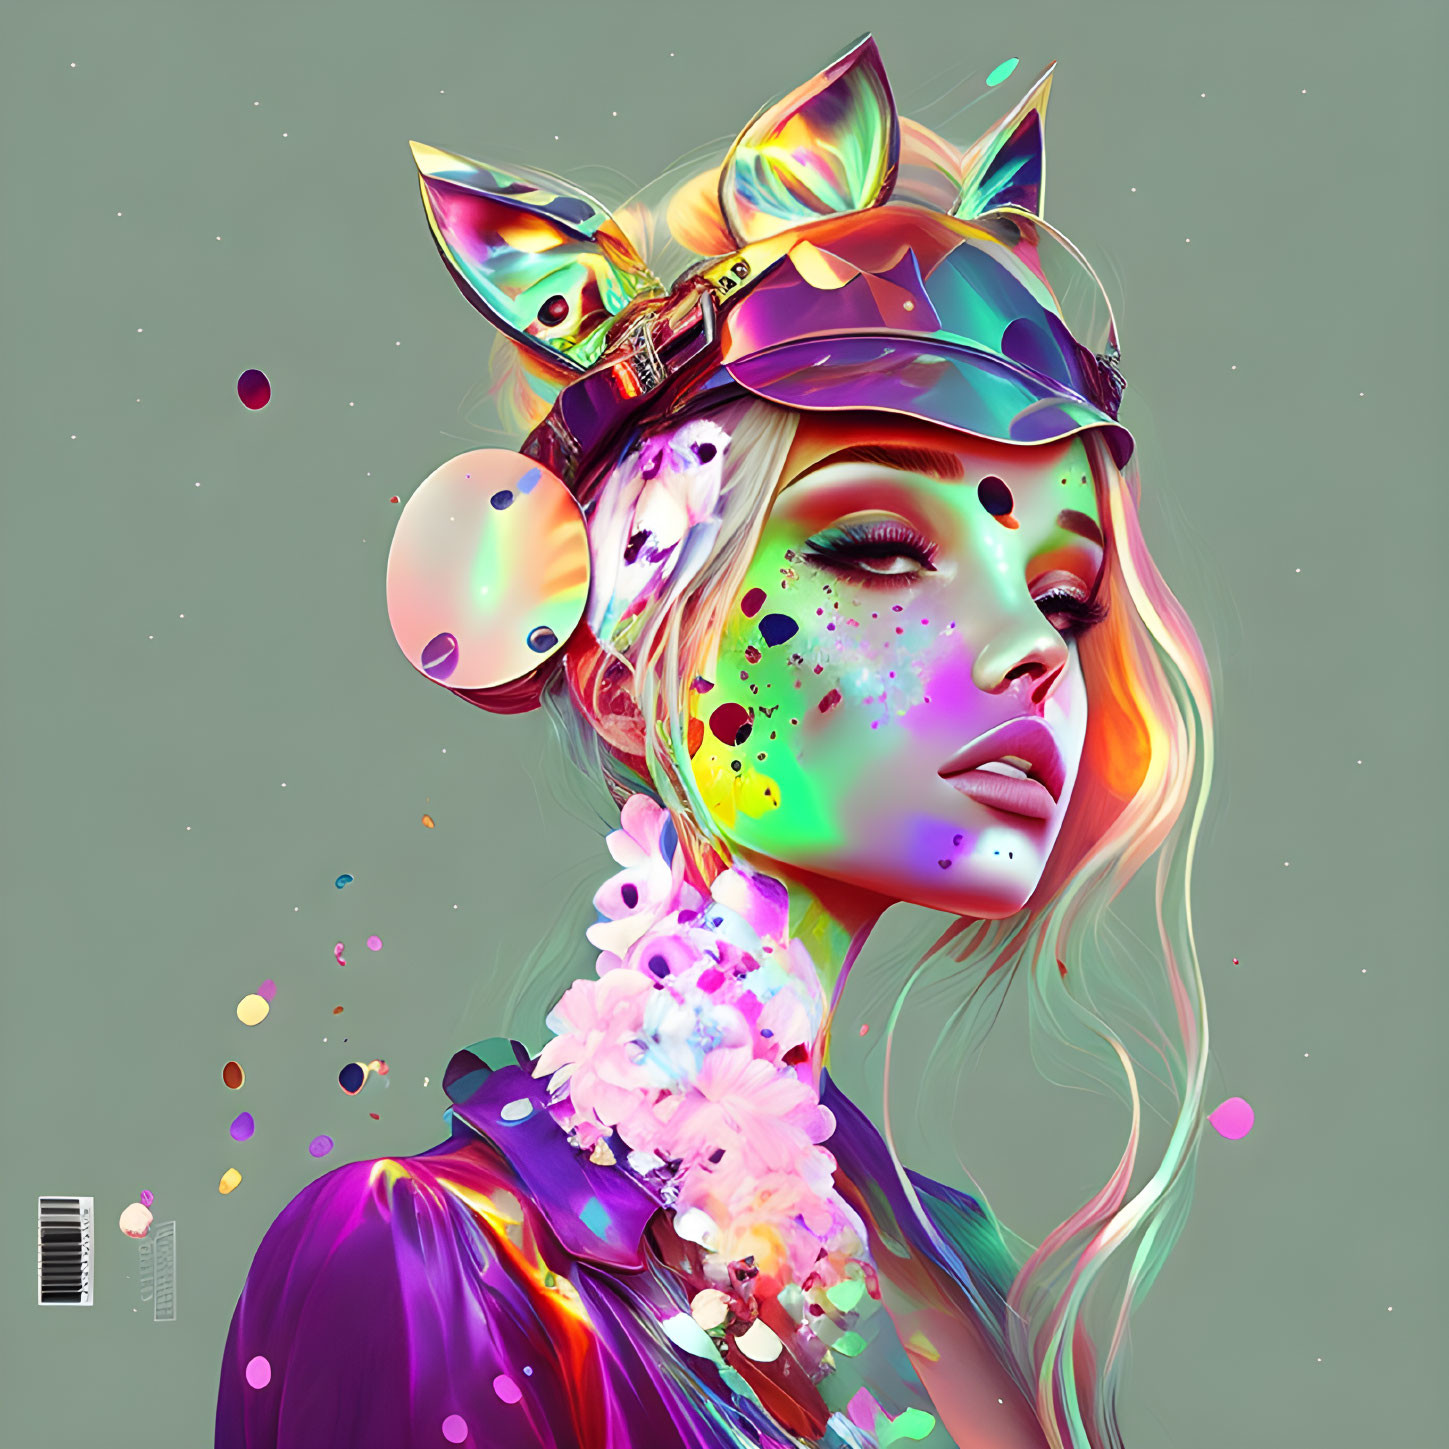 Colorful digital portrait of woman with whimsical makeup and cat-ear headpiece, surrounded by paint